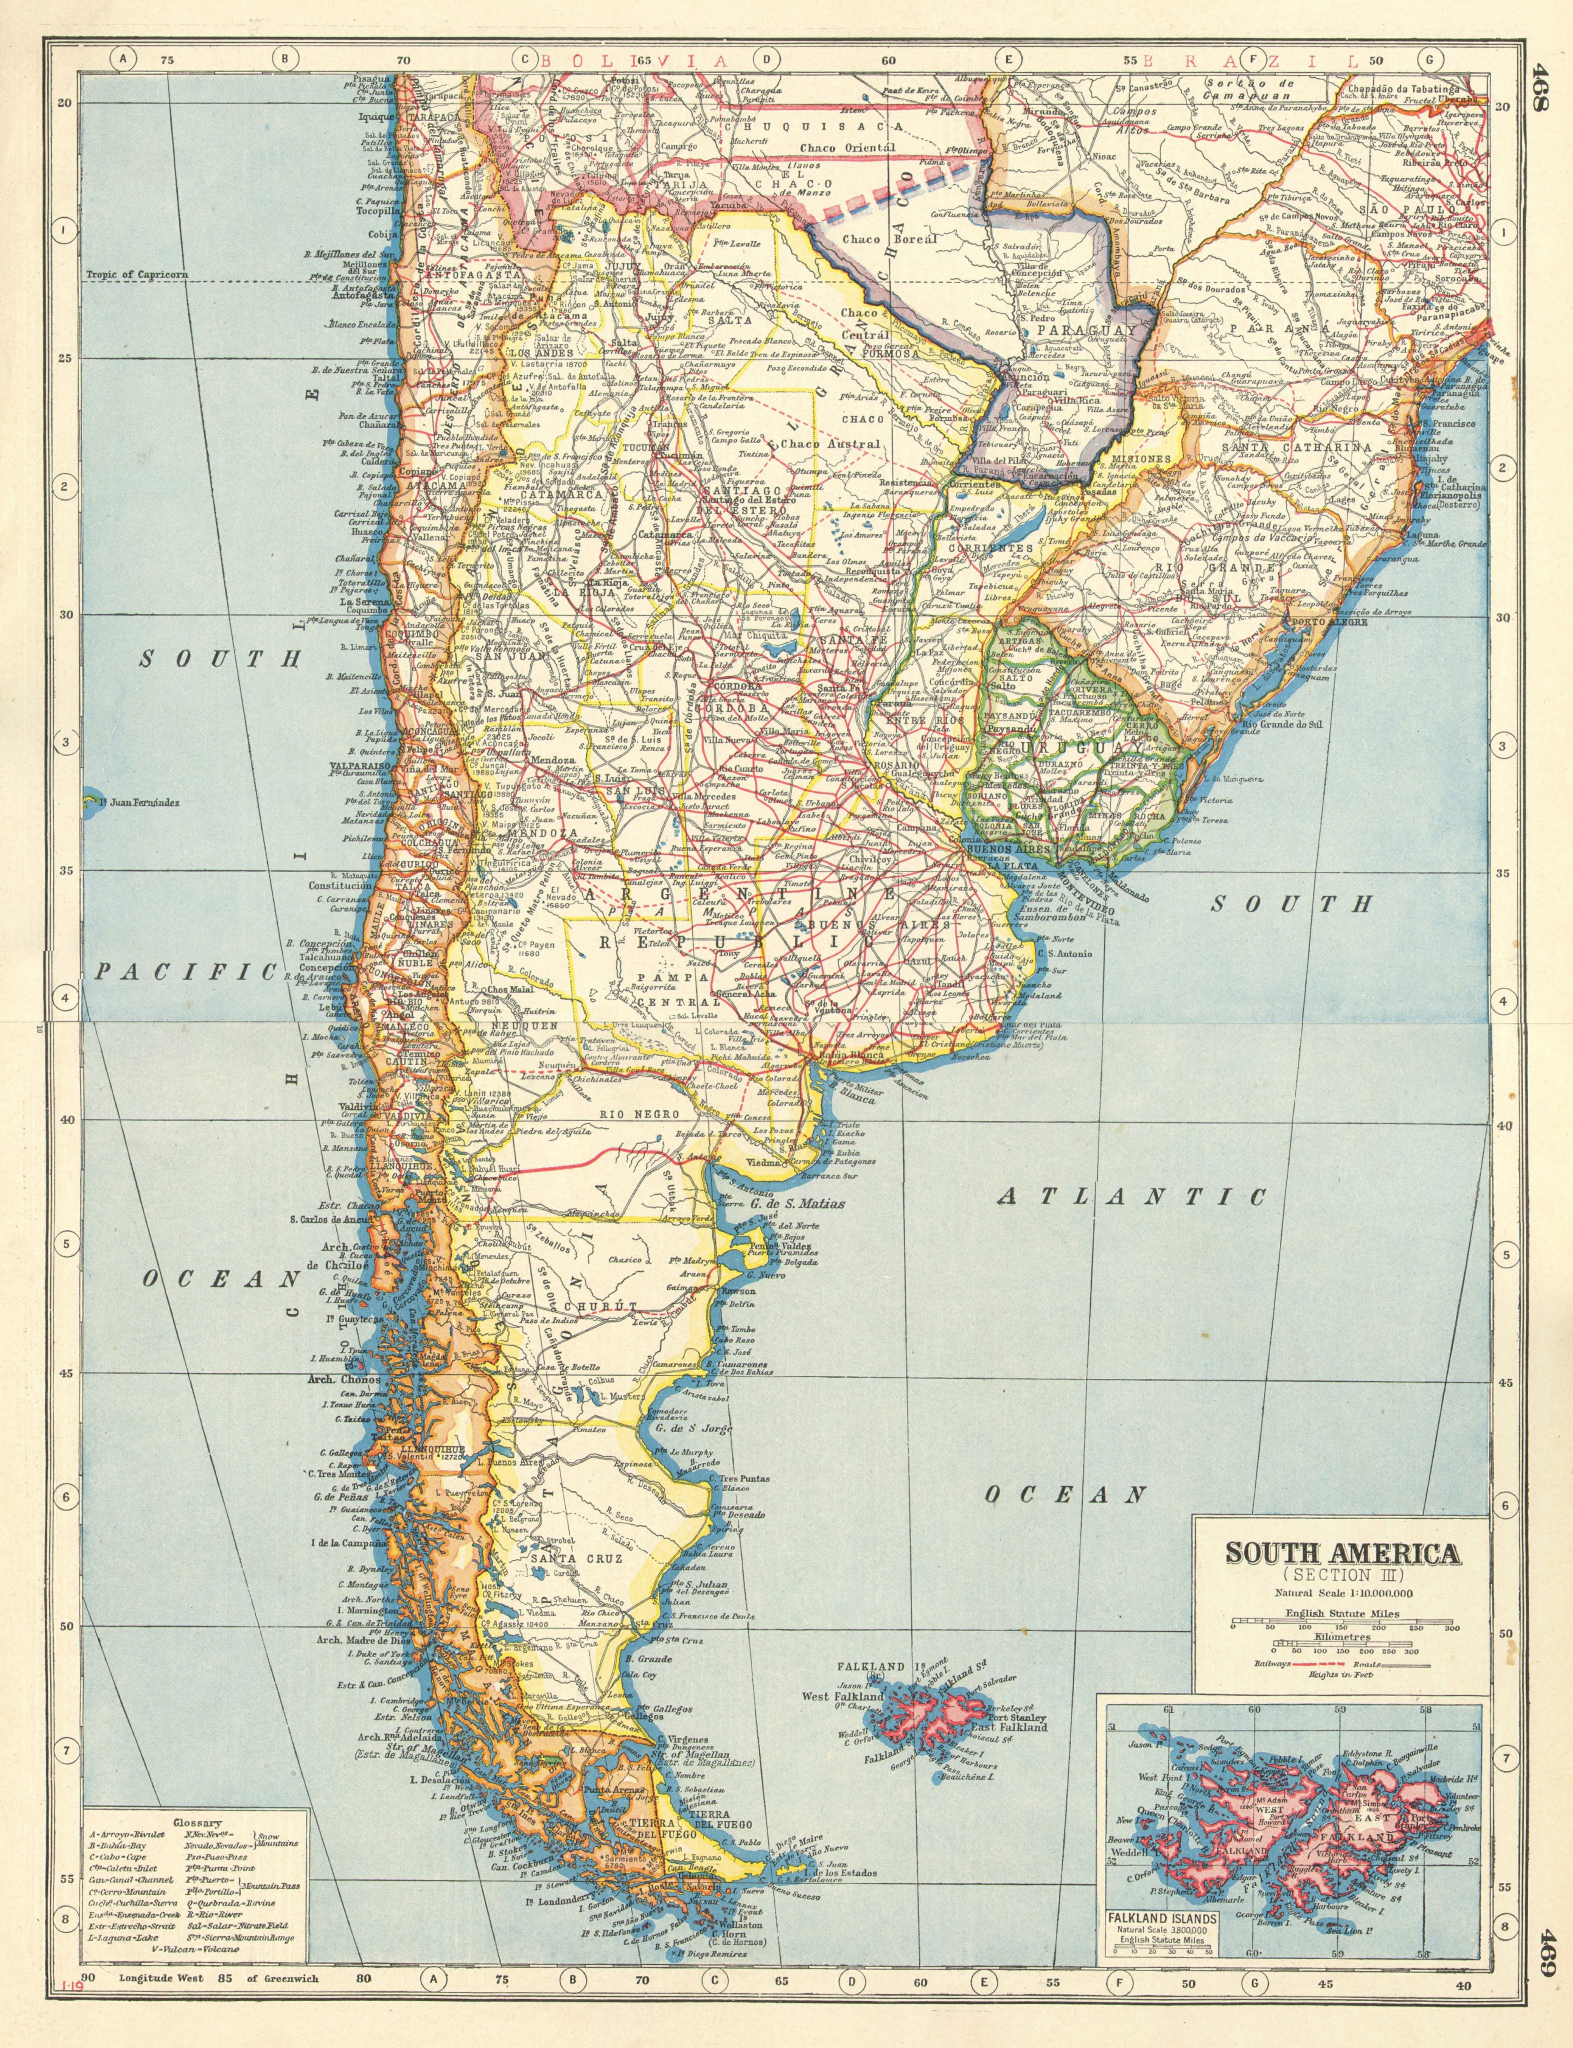 Associate Product S AMERICA. Bolivia-Paraguay Gran Chaco border dispute. Chile Argentina 1920 map